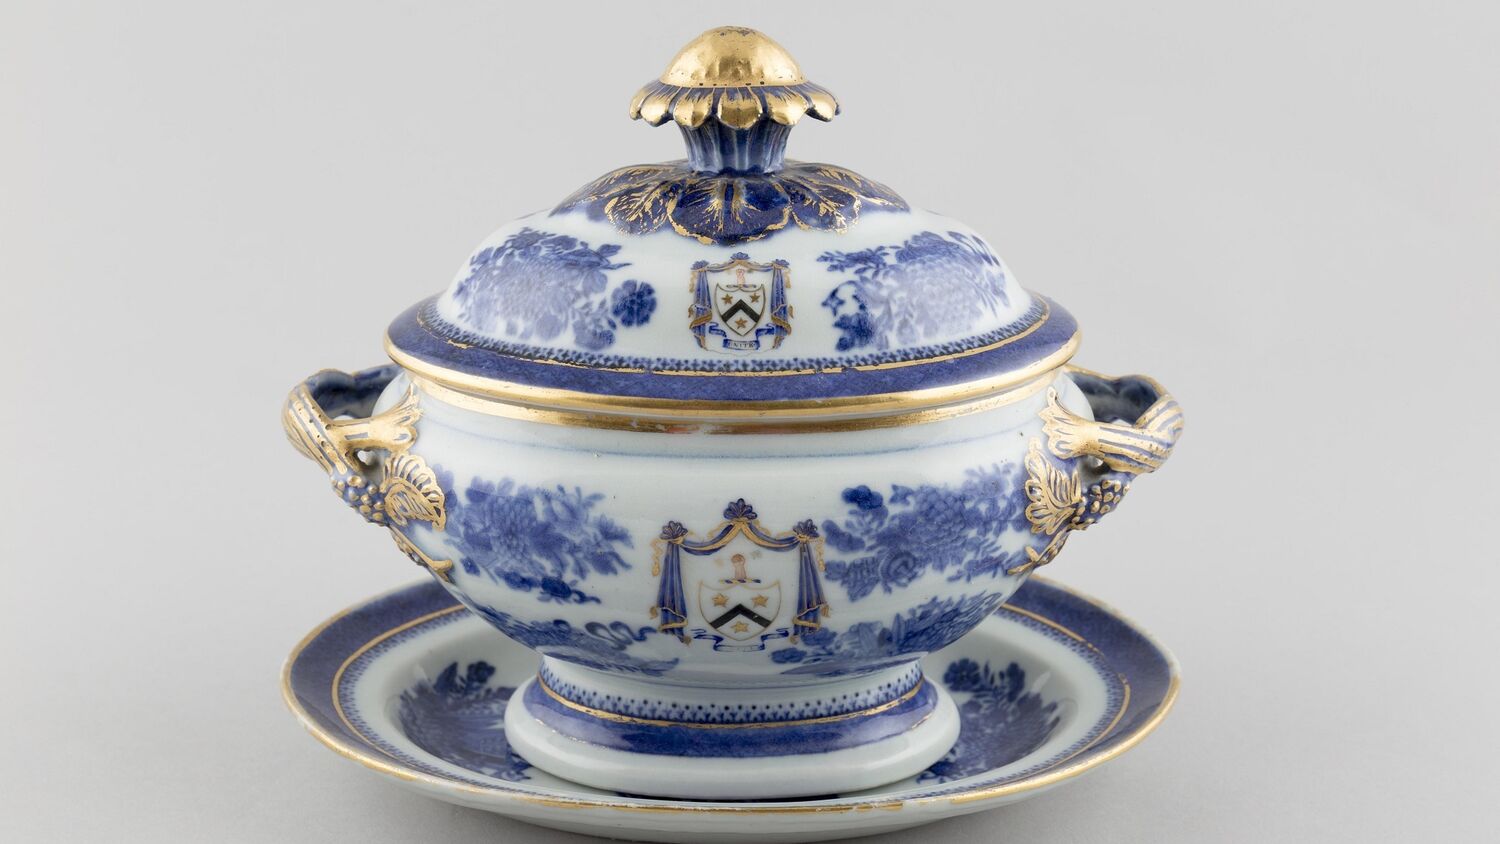 An elaborate porcelain pot with a lid stands on a little tray, against a plain grey background. It is decorated with a blue and gold pattern and has a family crest at the centre.